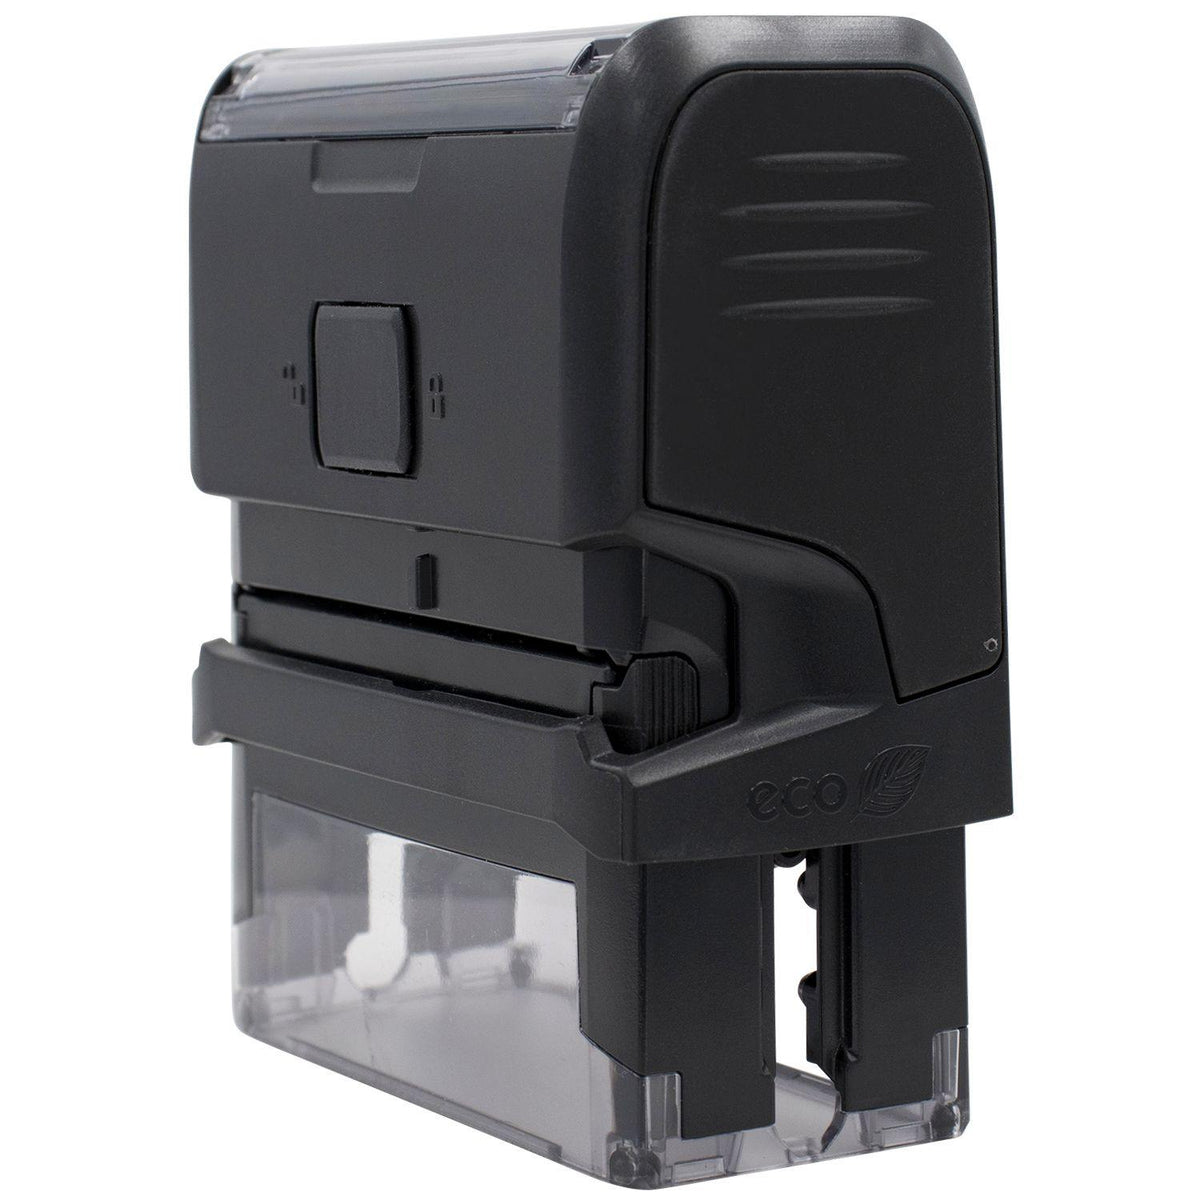 Large Self Inking Package List Enclosed Stamp - Engineer Seal Stamps - Brand_Trodat, Impression Size_Large, Stamp Type_Self-Inking Stamp, Type of Use_Postal &amp; Mailing, Type of Use_Shipping &amp; Receiving